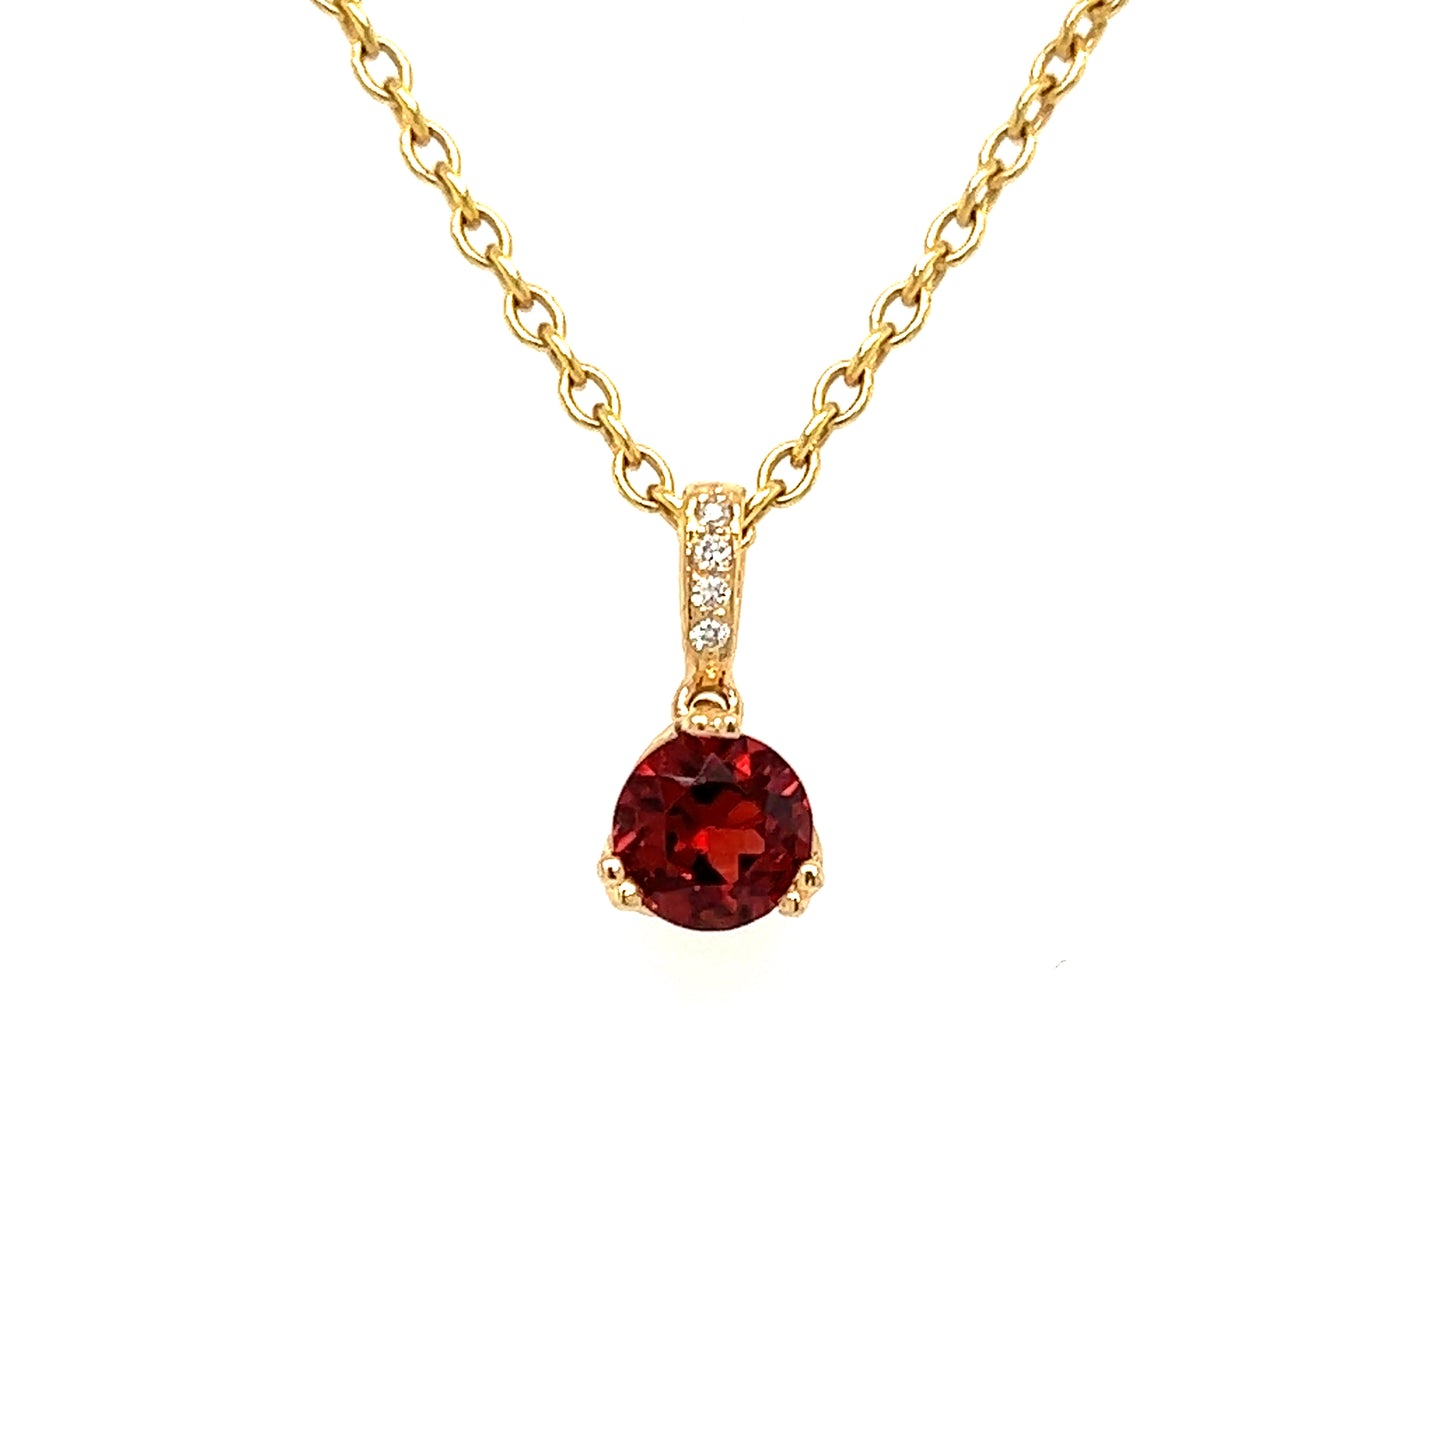 Round Garnet Pendant With Four Diamonds in 14K Yellow Gold Front View Pendant and Chain